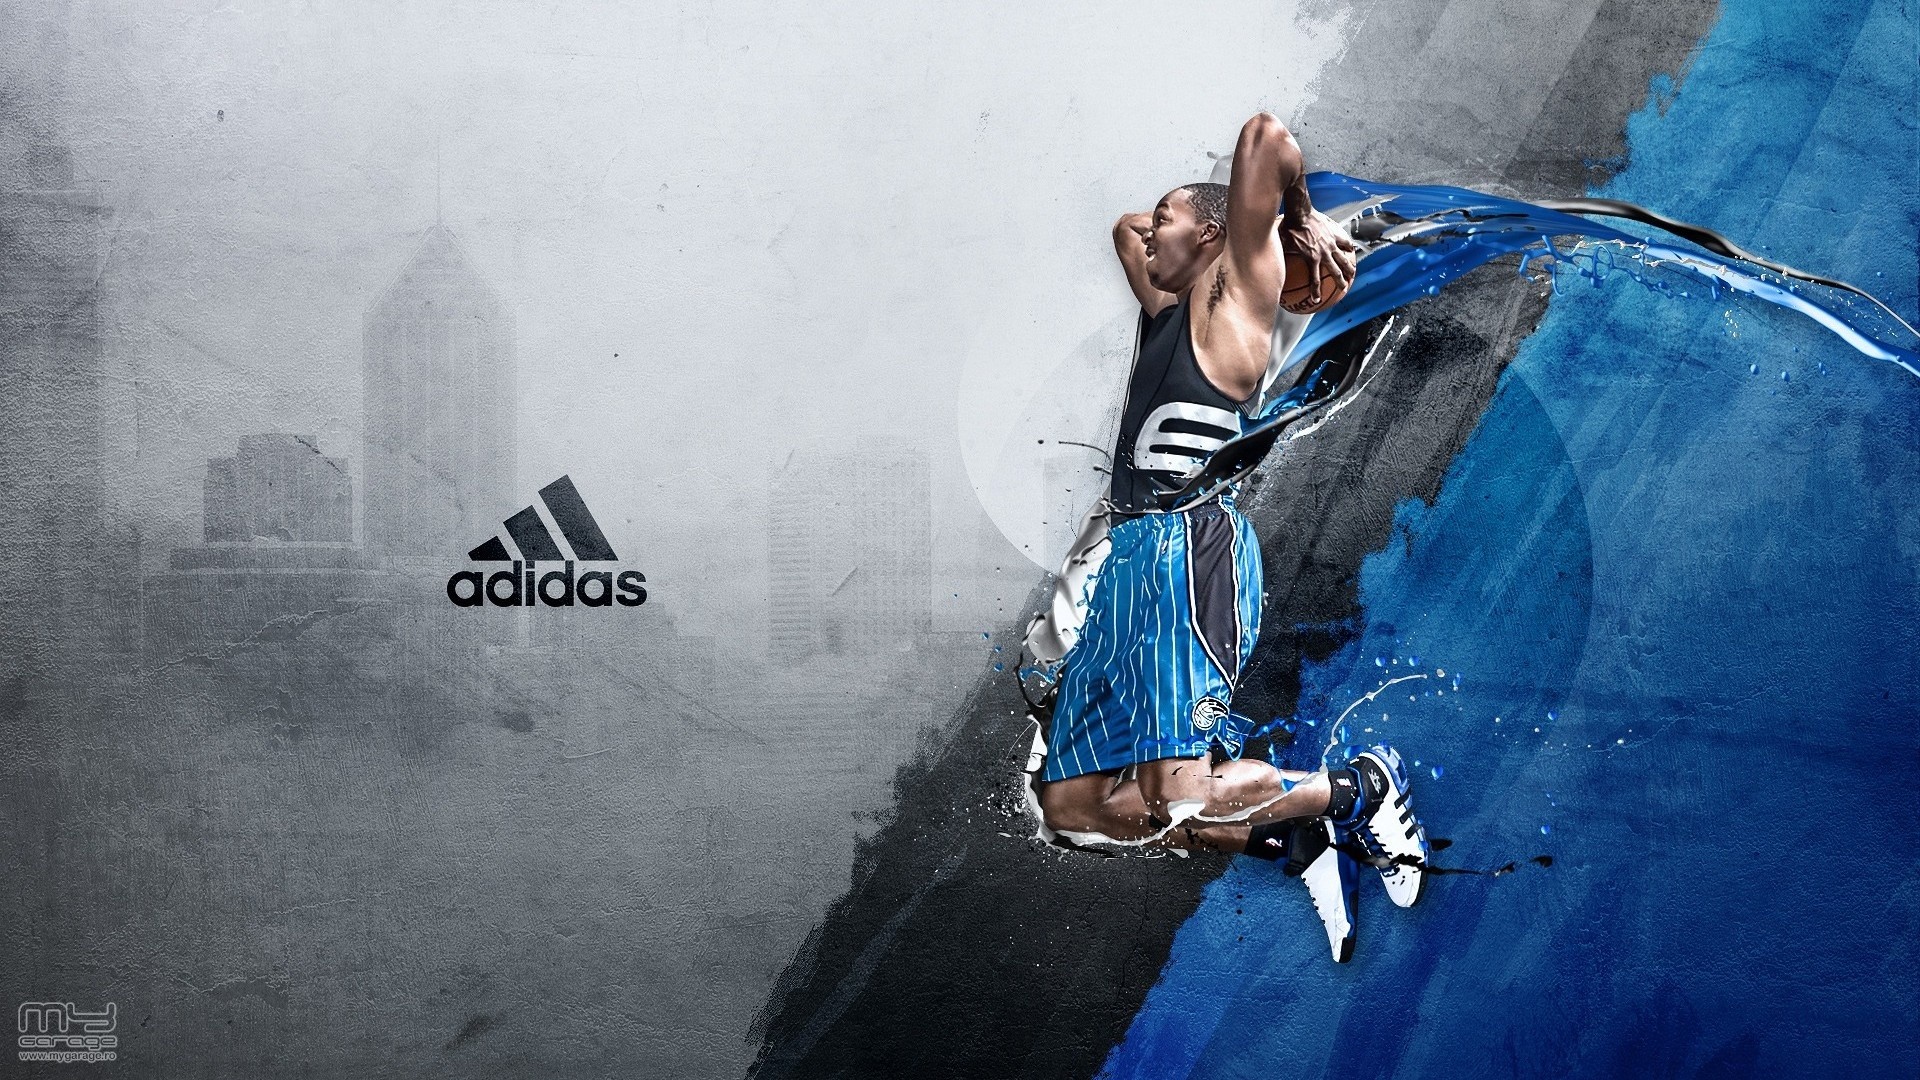 sports wallpapers hd,blue,wall,street dance,cool,graphic design